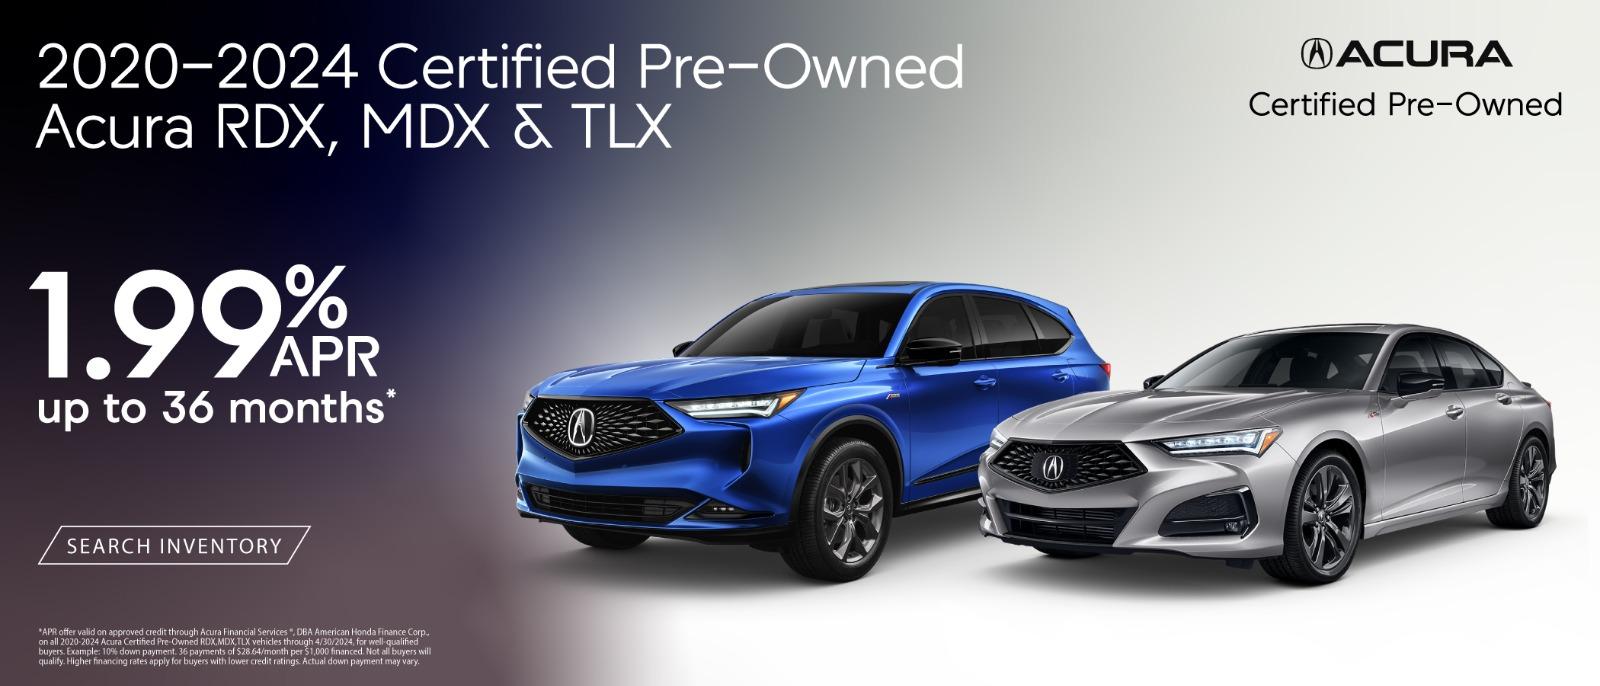 2020-2024 Certified Pre-Owned Acura TLX & MDX 1.99% APR 36months*